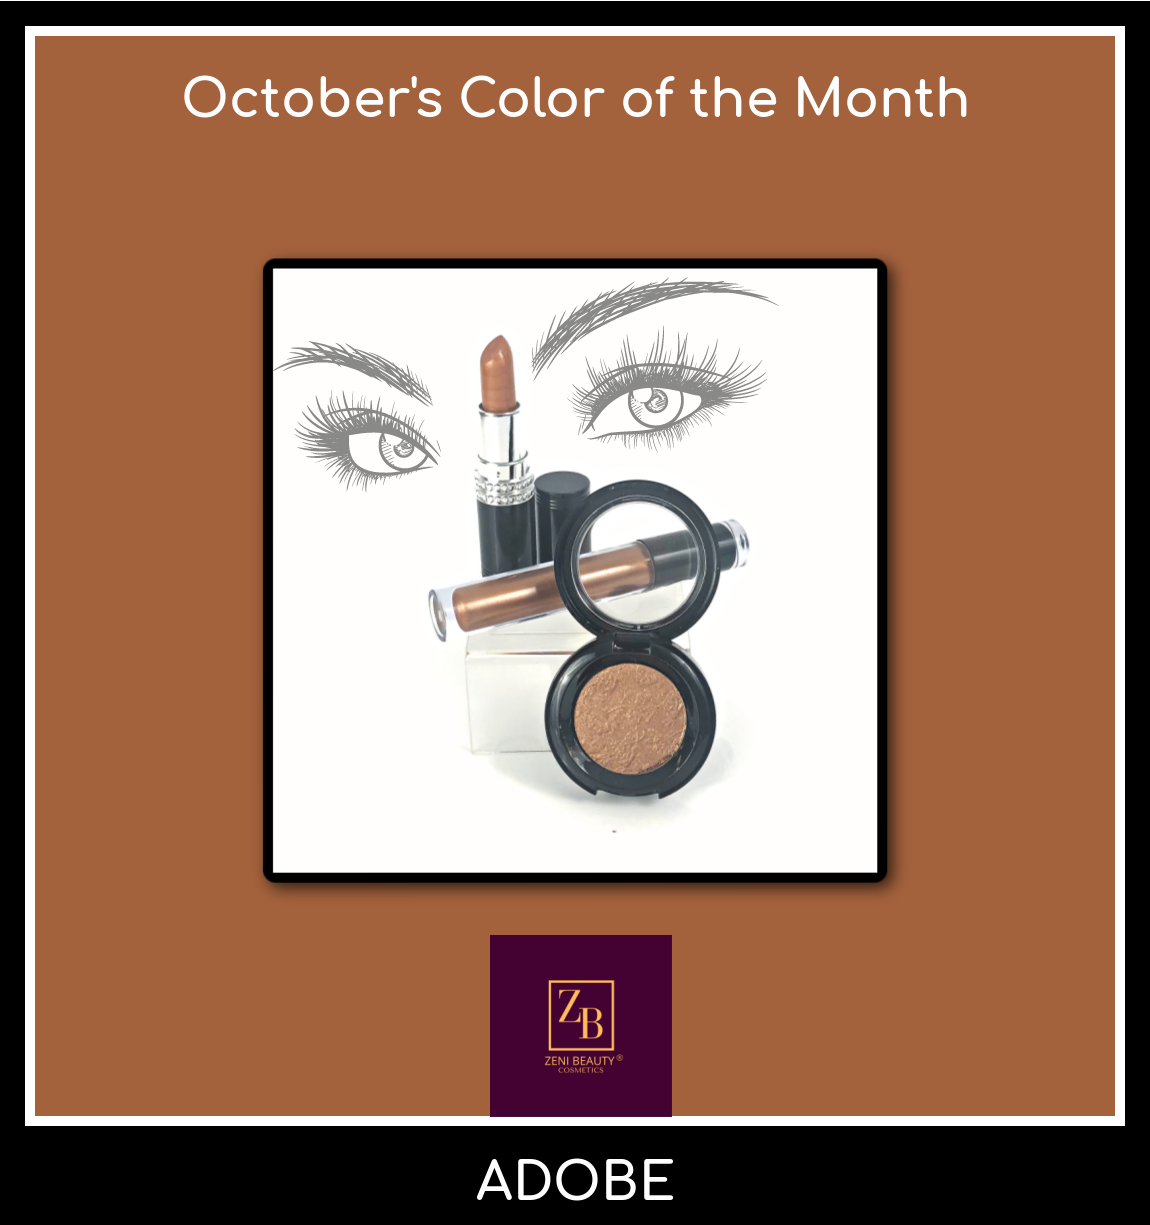 October's Color of the Month is ADOBE